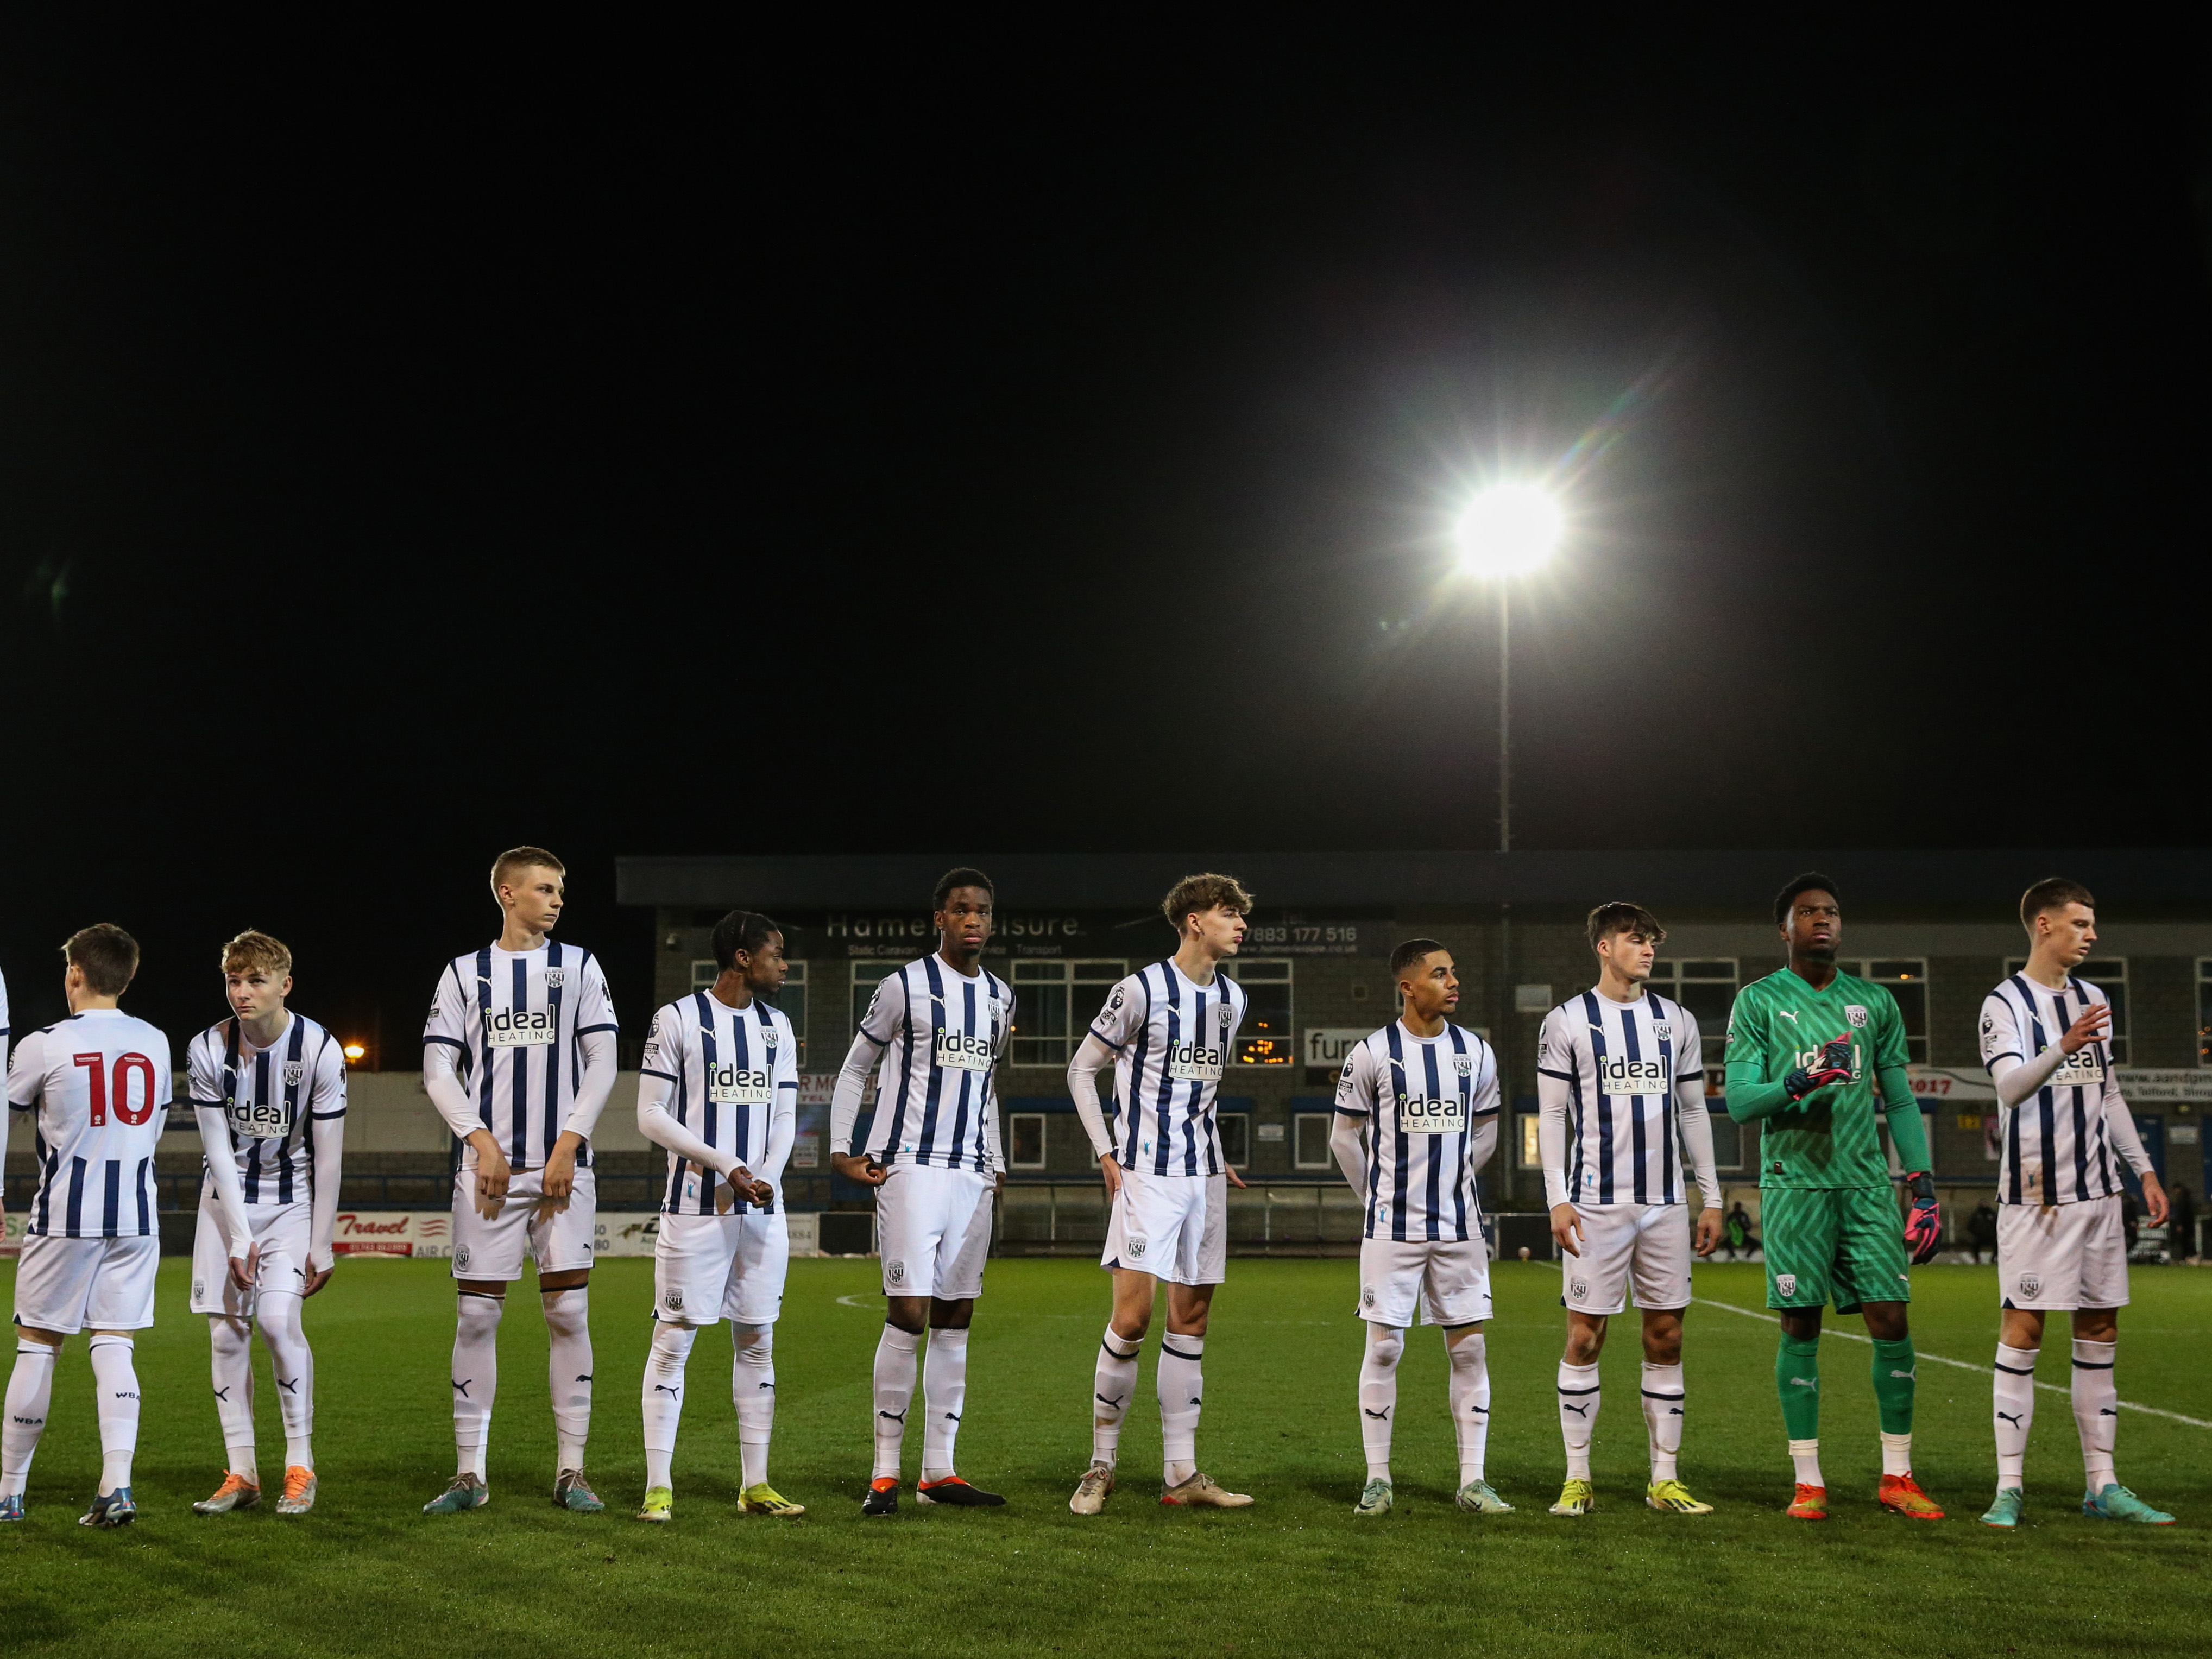 A photo of Albion's U21s lining up under the lights at AFC Telford's New Bucks Head ground